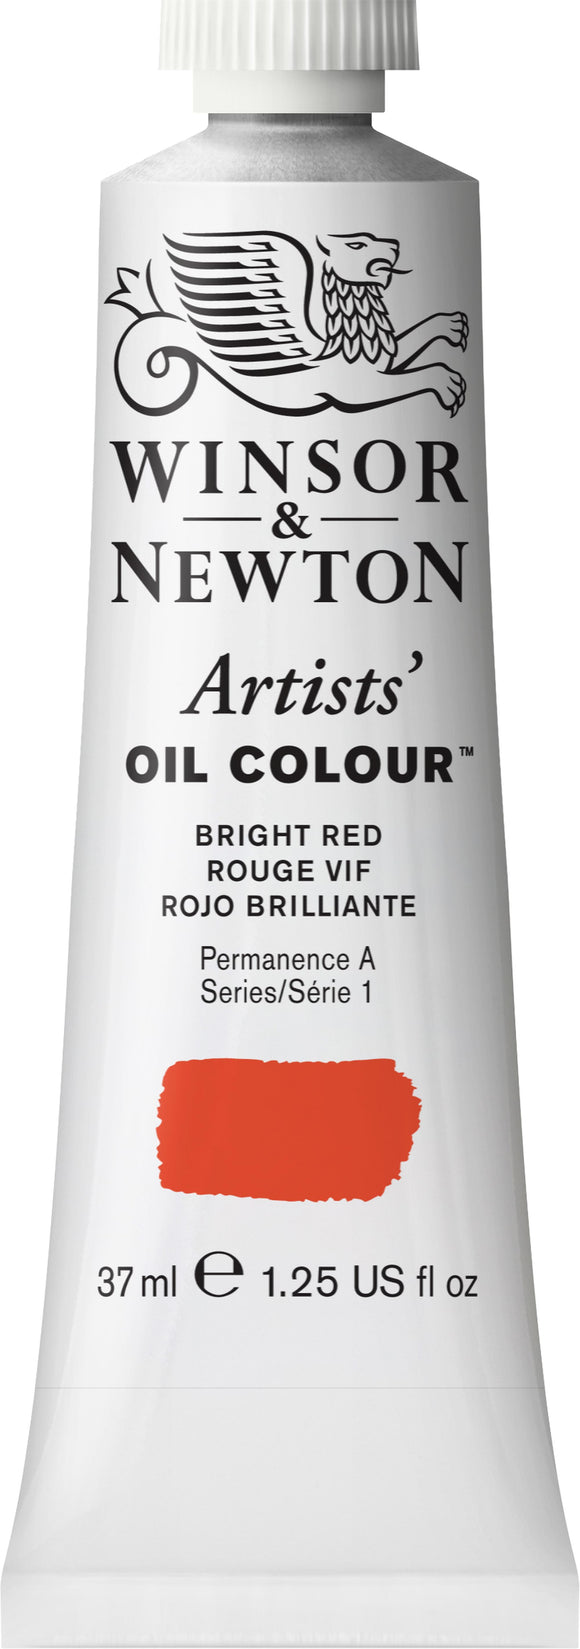 Winsor & Newton Artists Oil Color Bright Red 37Ml